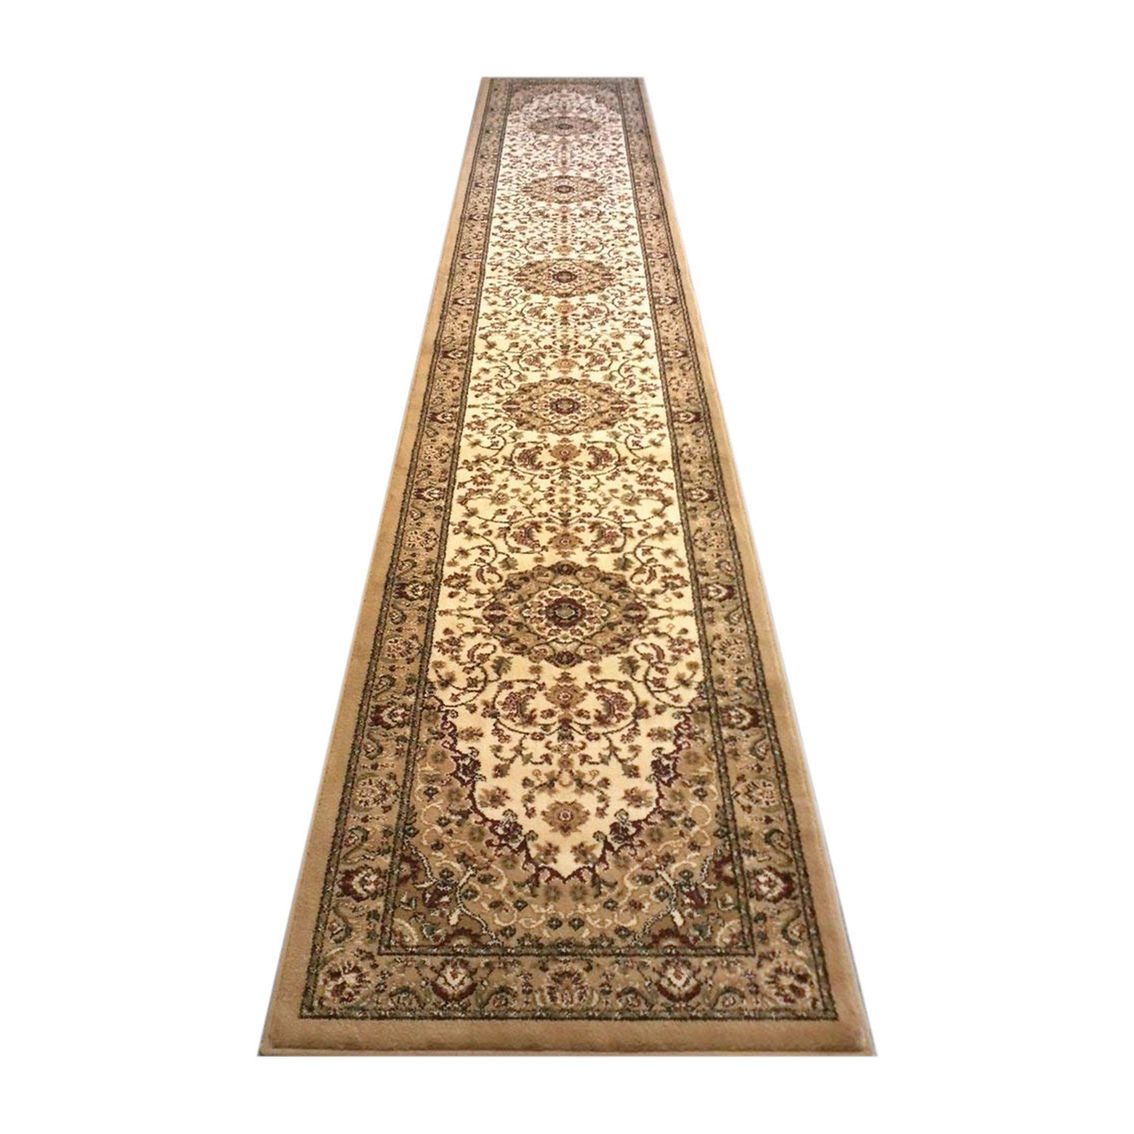 Flash Furniture 3' x 20' Traditional Persian Style Area Rug - Image 3 of 5